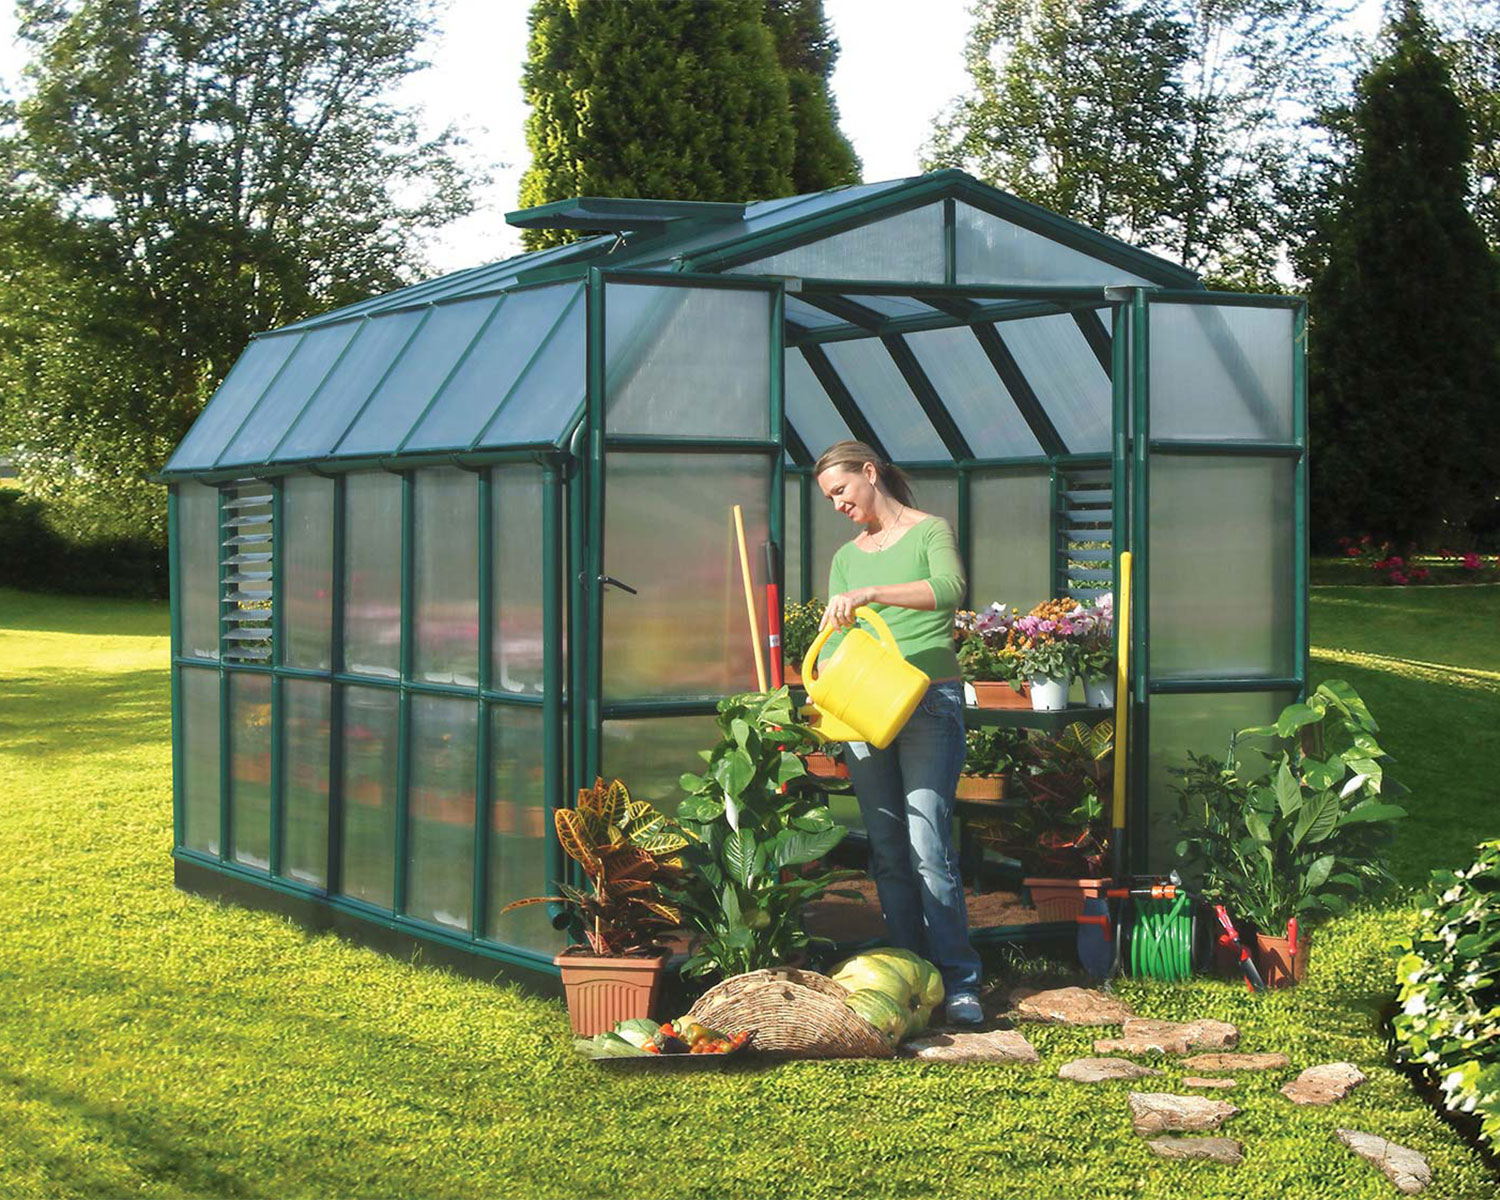 Greenhouse Prestige 8 ft. x 12 ft. Green Structure & Twin Wall Panels watering plants